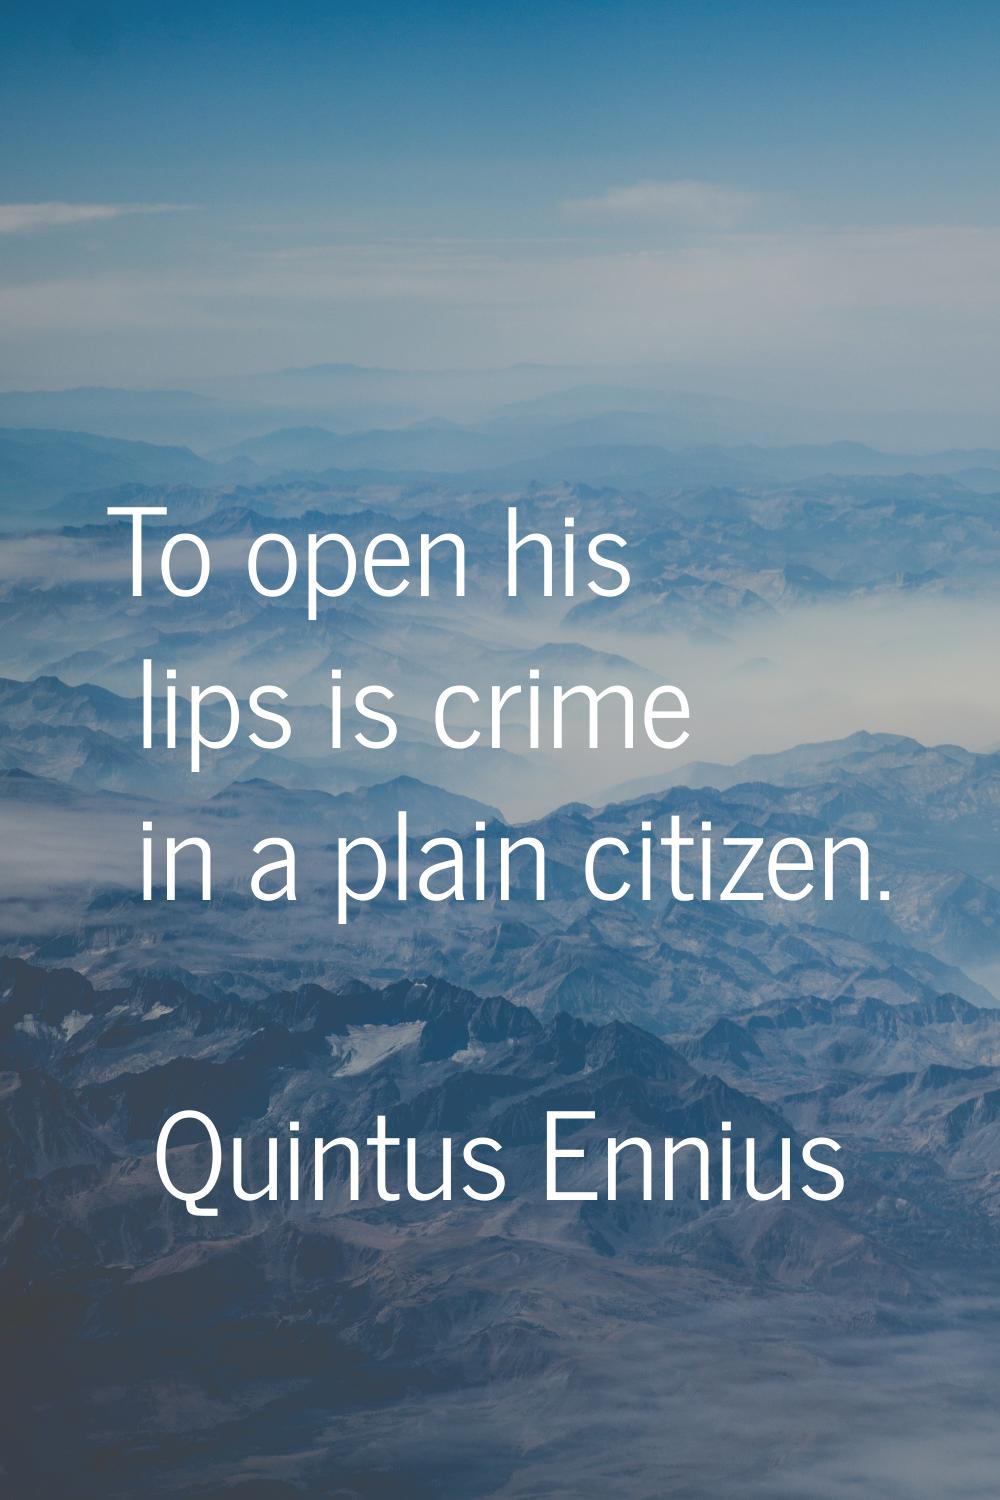 To open his lips is crime in a plain citizen.